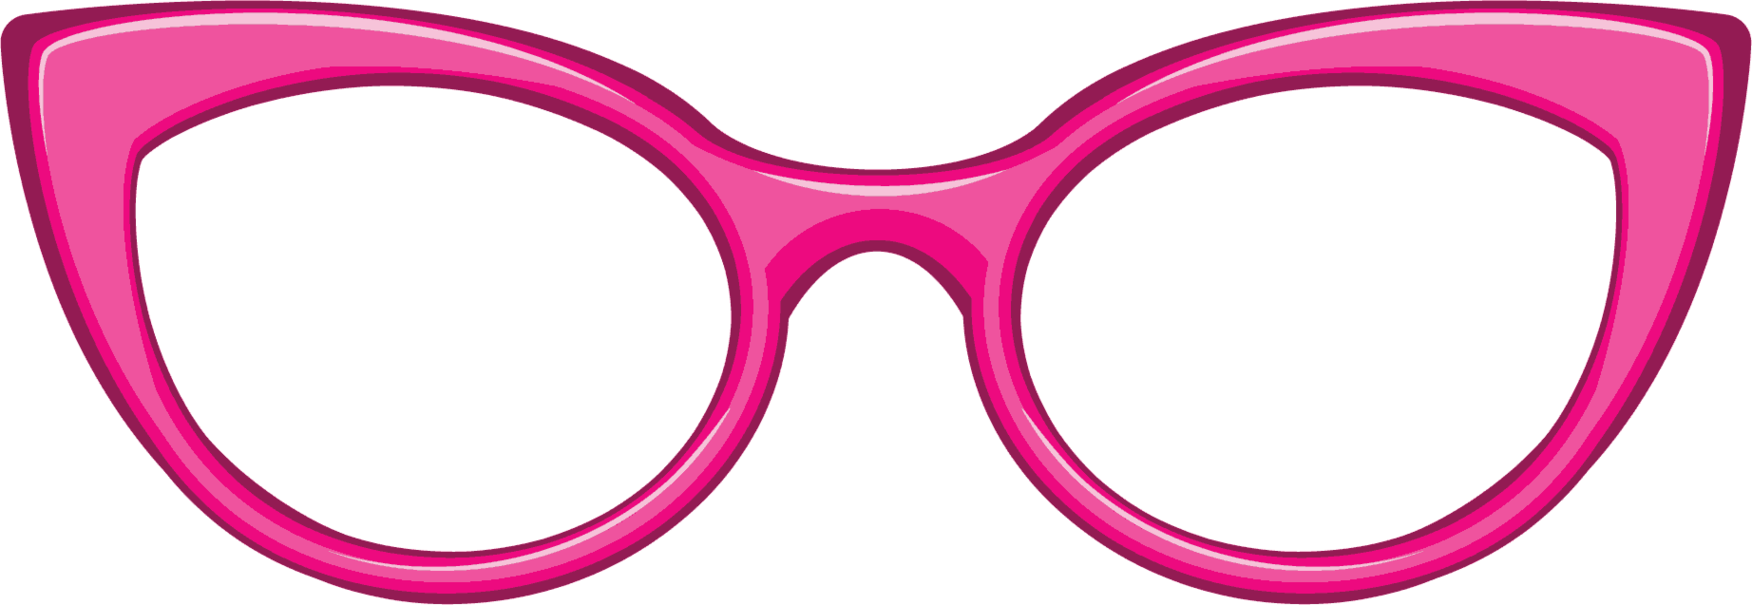 Glasses Photo Clipart - Free to use Clip Art Resource